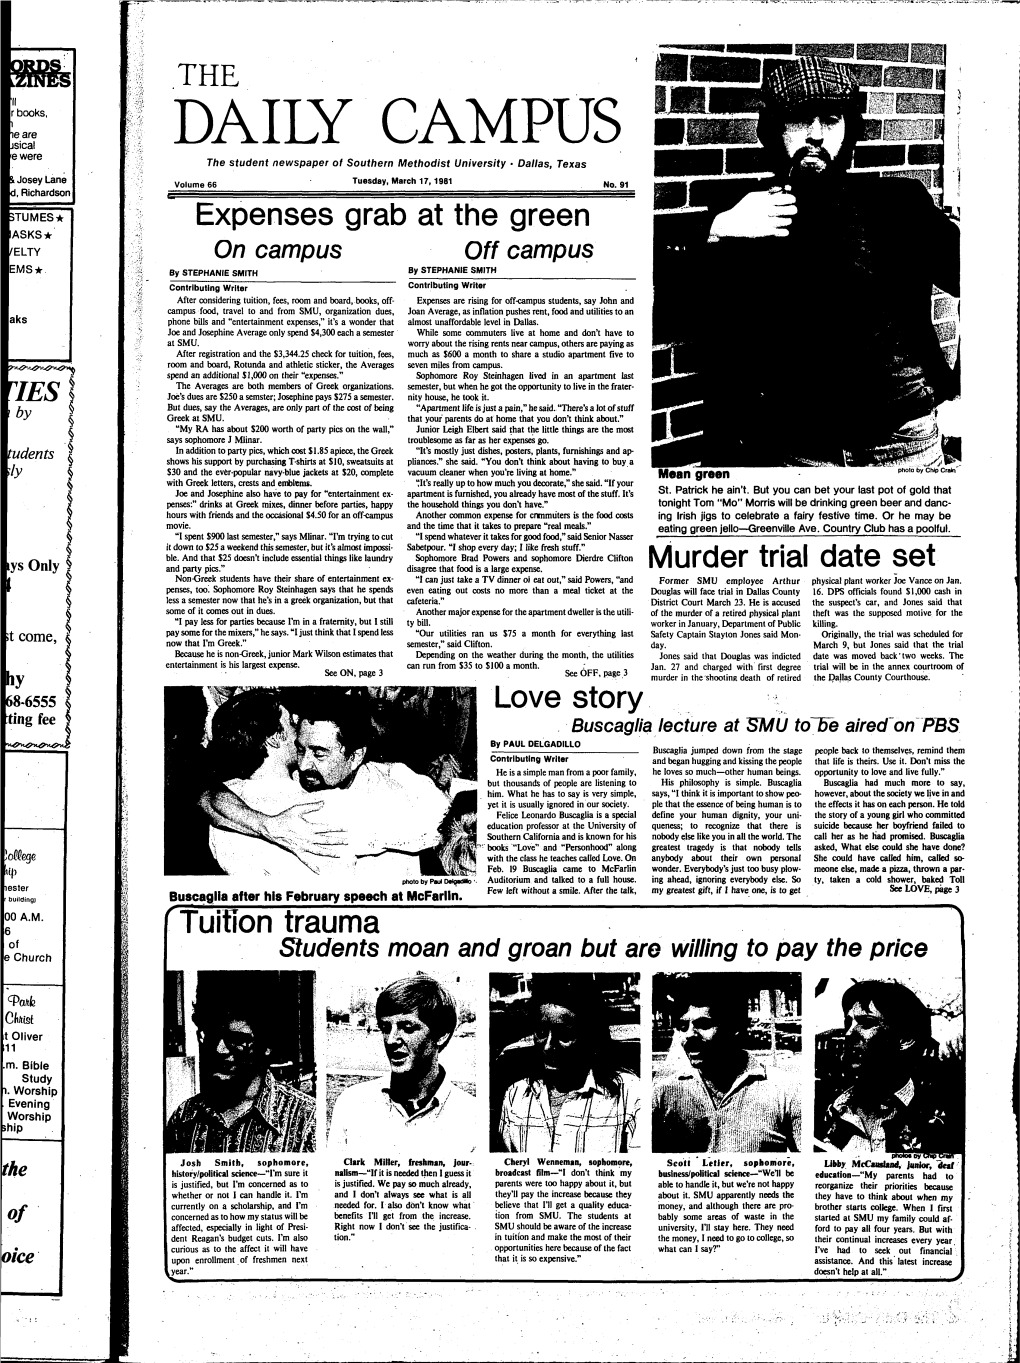 CAMPUS E Were the Student Newspaper of Southern Methodist University * Dallas, Texas Josey Lane Volume 66 Tuesday, March 17, 1981 No